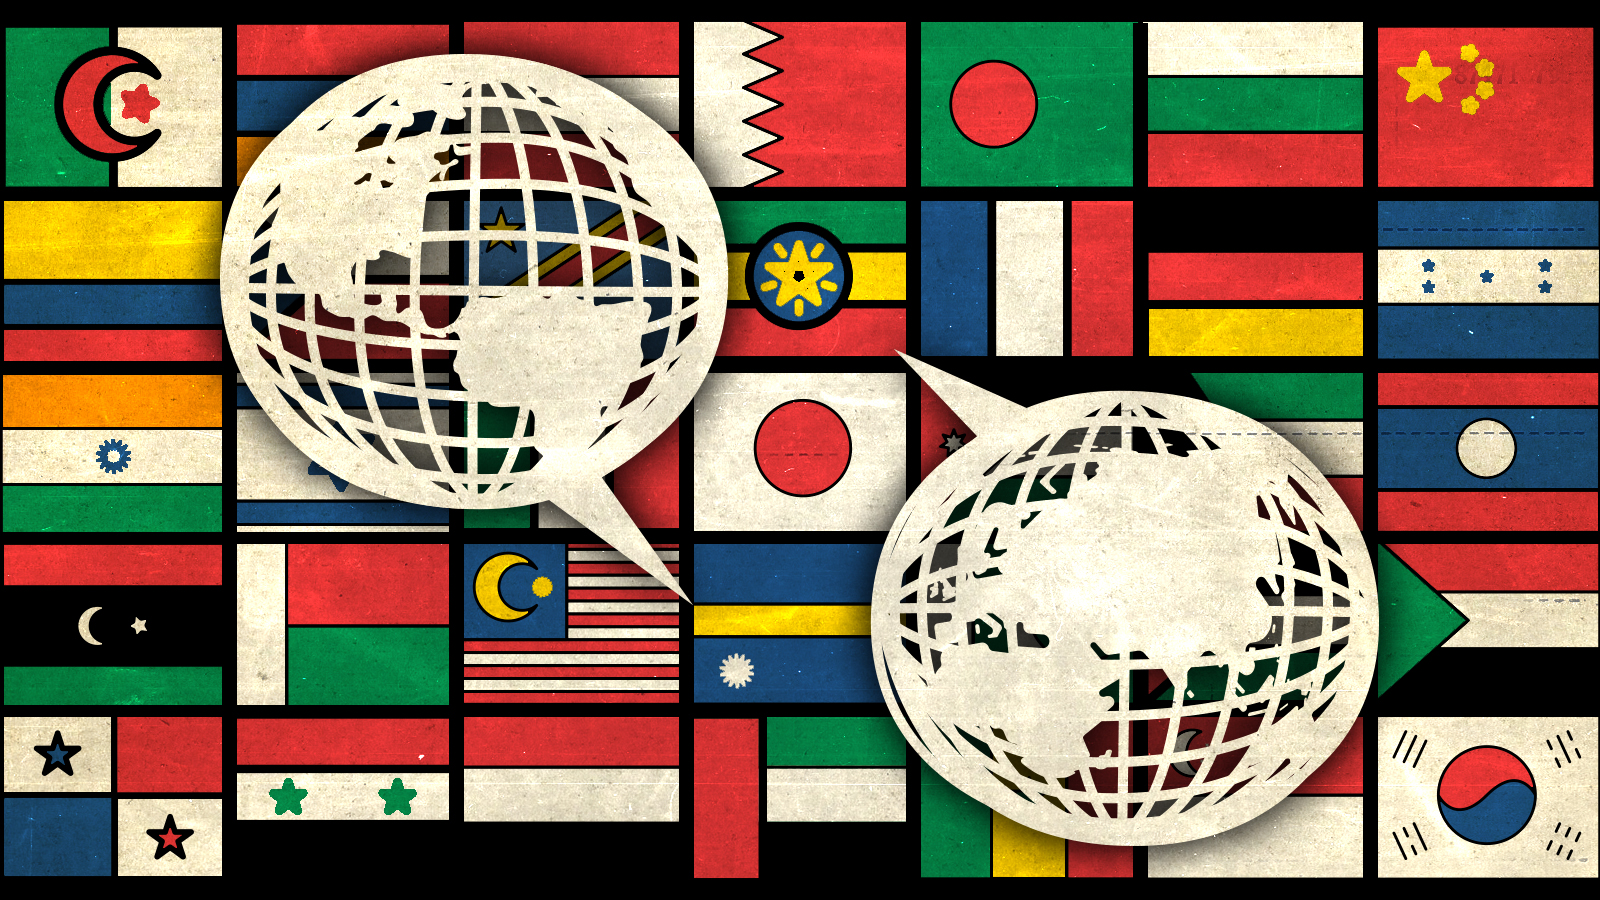 Photoillustration of flags from around the world and speech bubbles